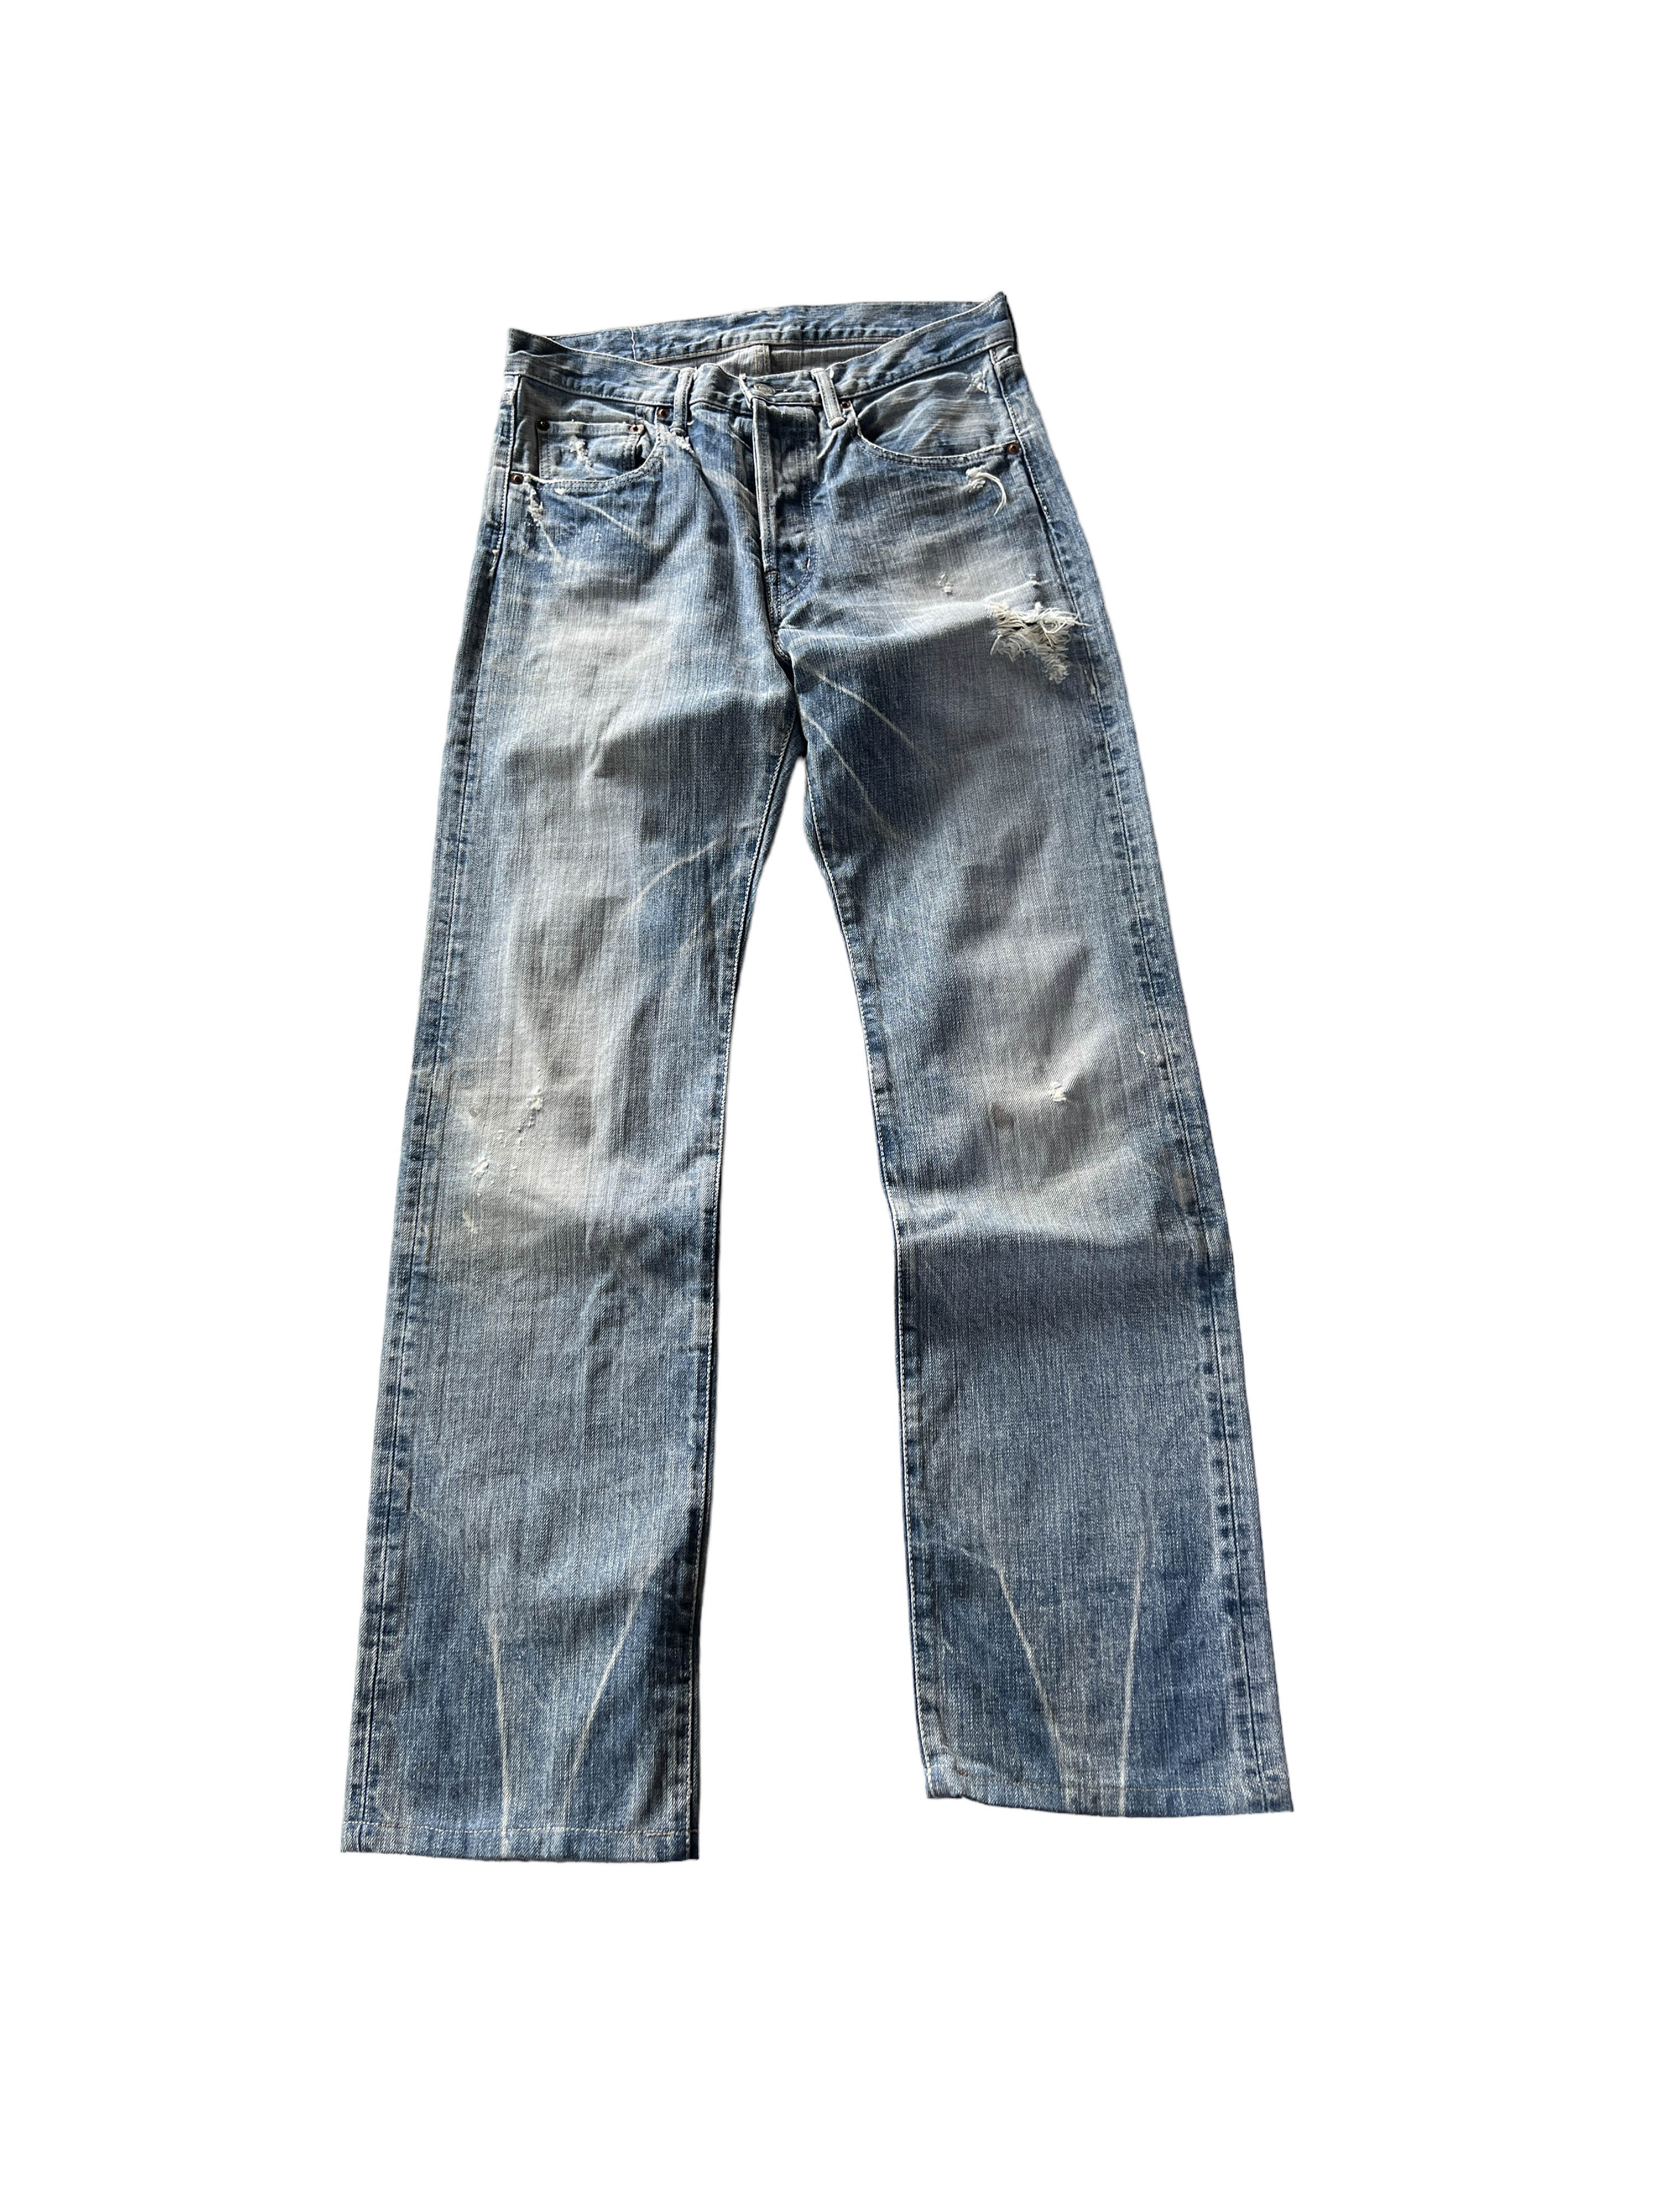 SPELL BOUND 40-126A DOMINGO 5 pocket washed jean